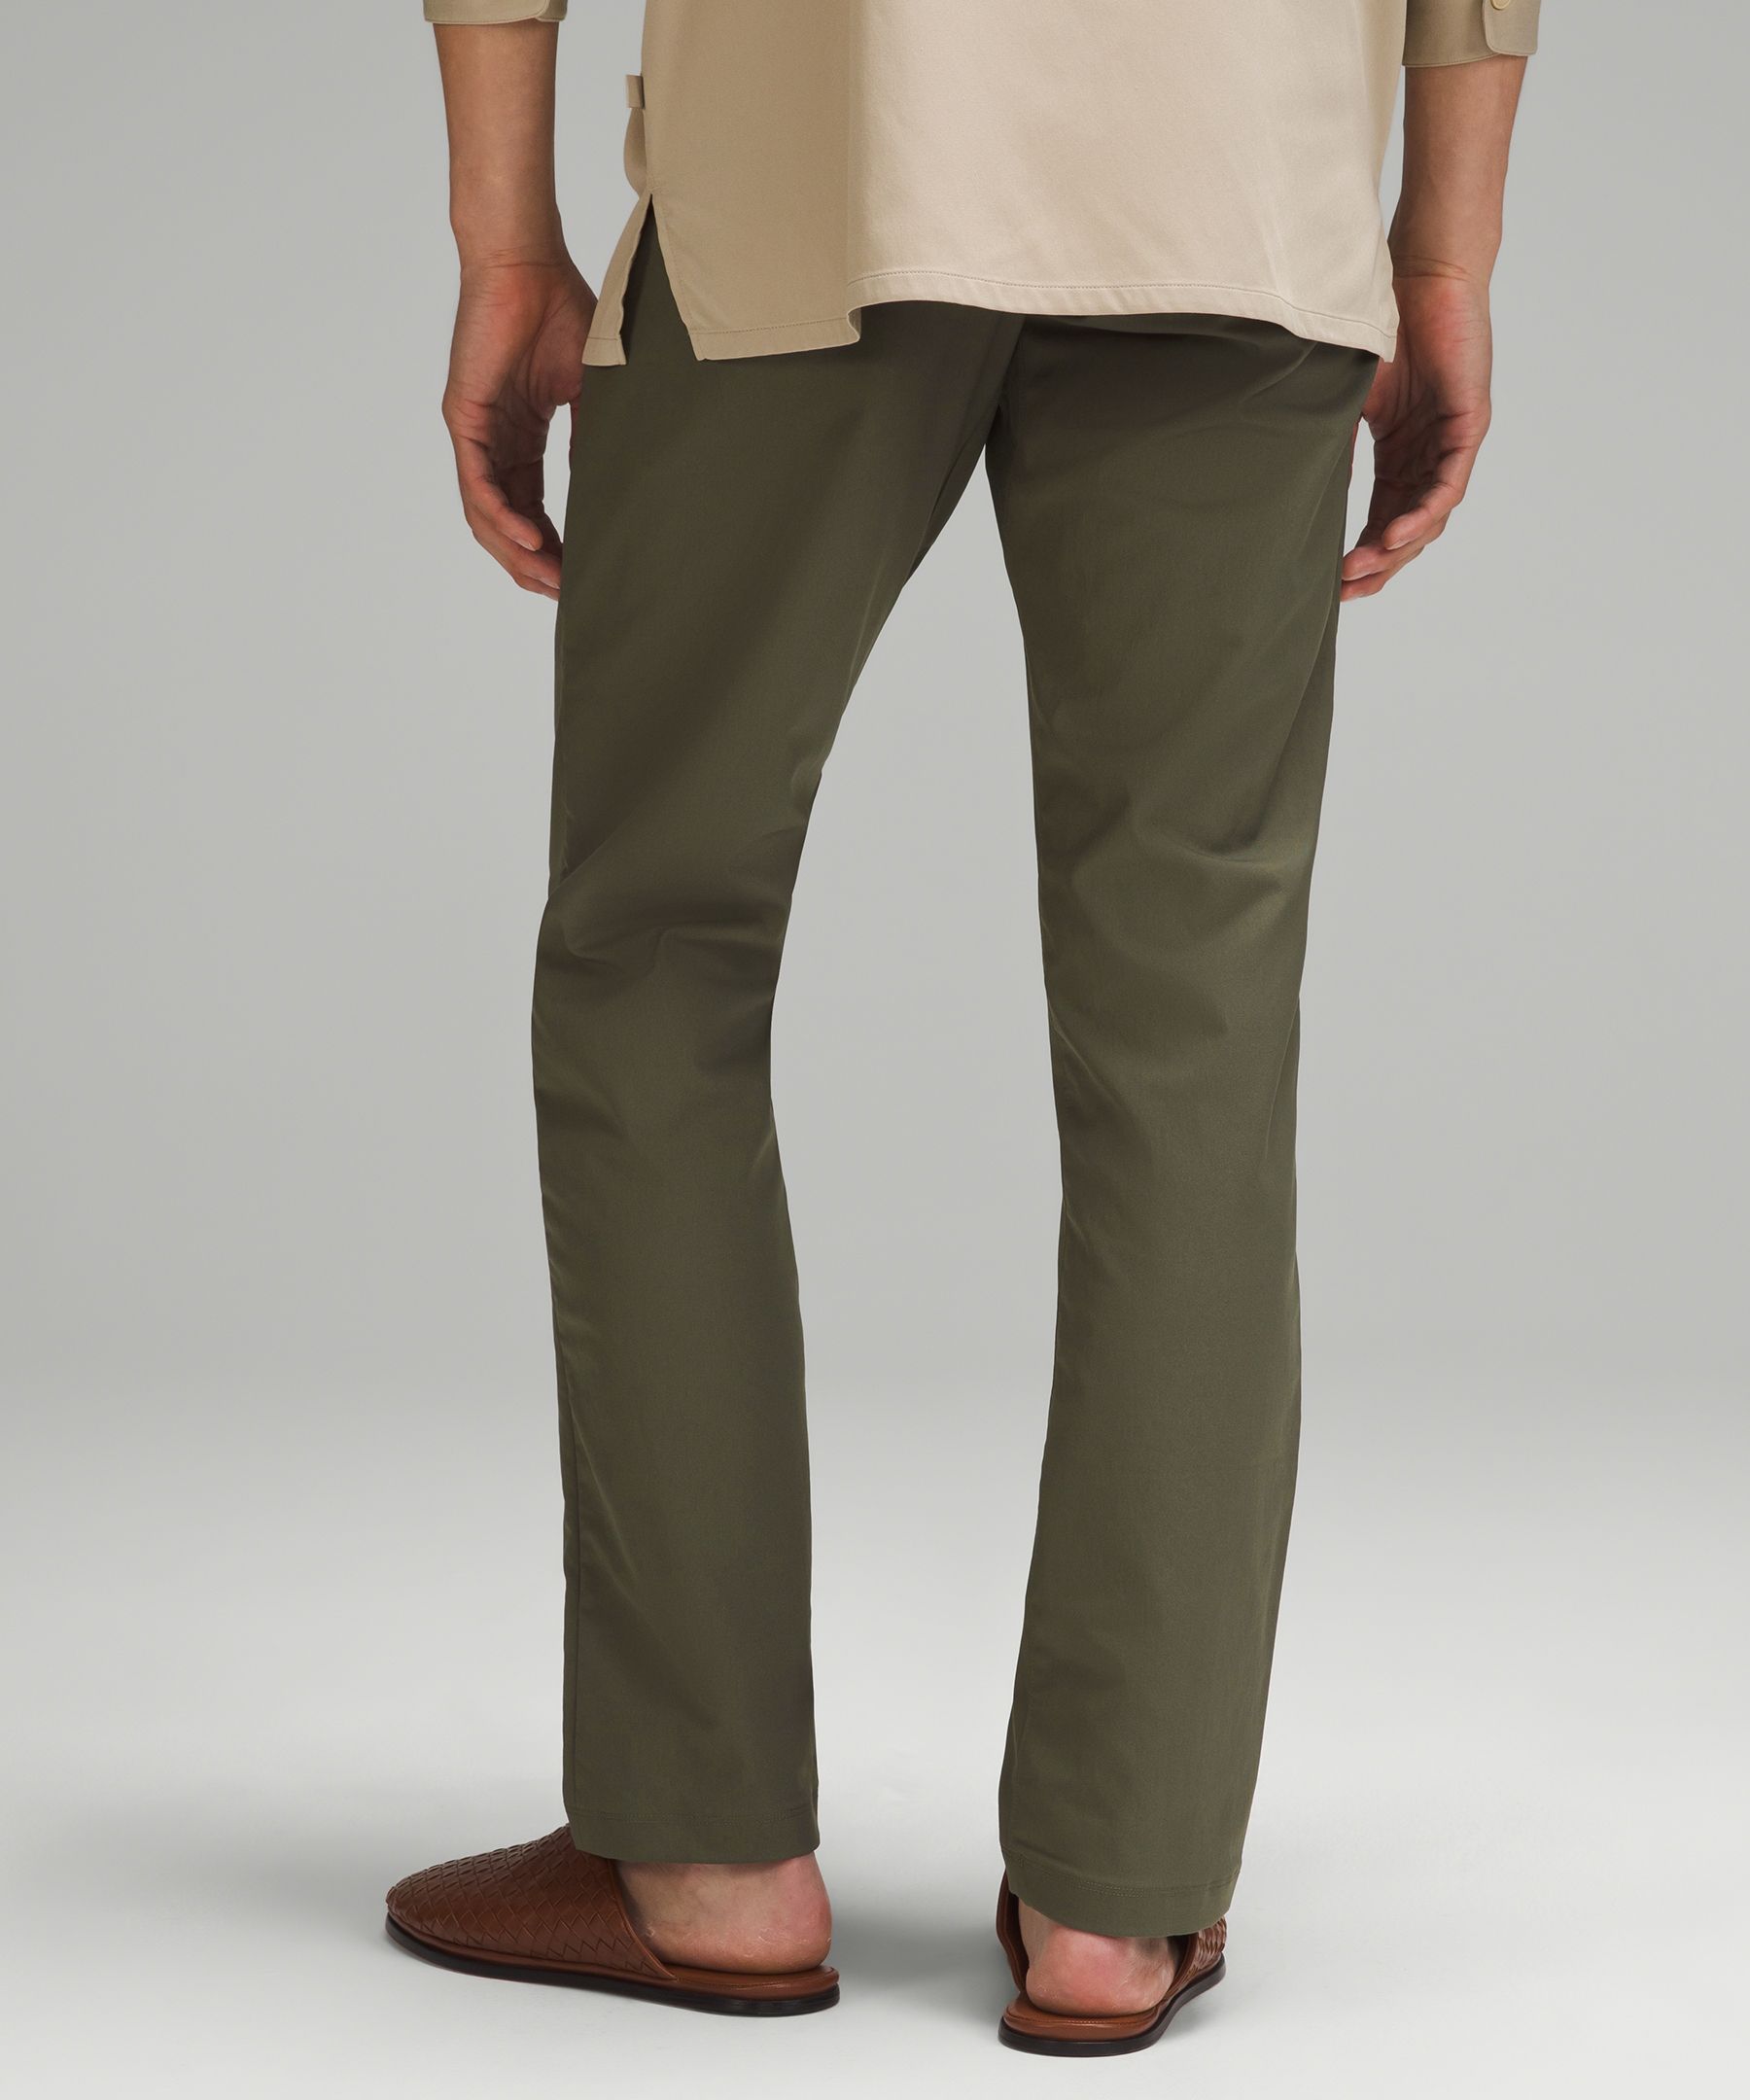 ABC Classic-Fit Trouser 30L *Smooth Twill, Men's Trousers